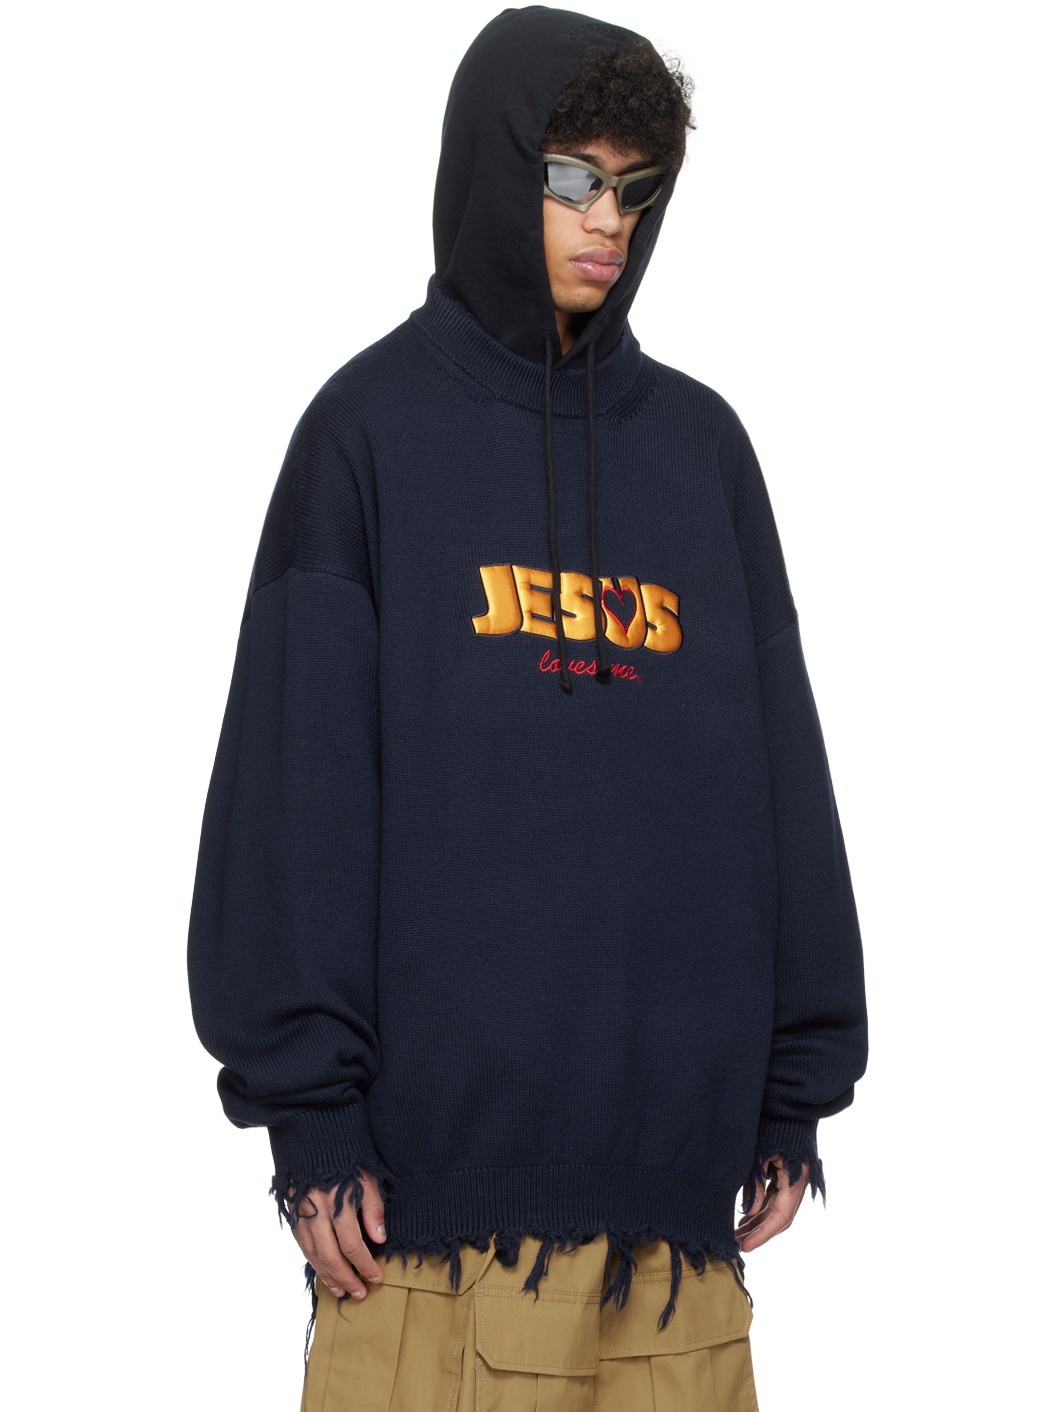 Navy 'Jesus Loves You' Sweater - 2